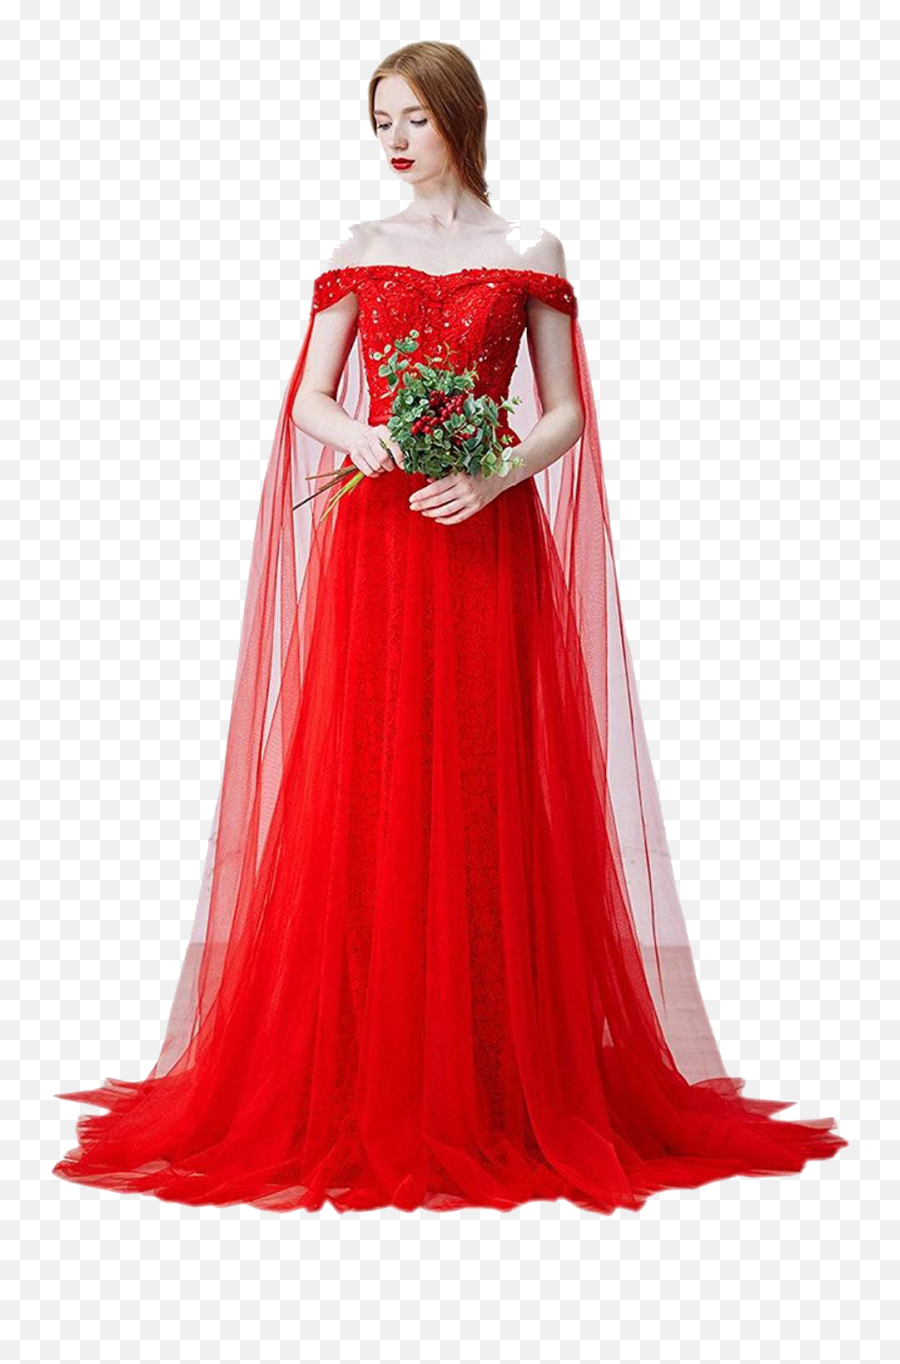 Red Bridal Gowns Png Image Download Dress